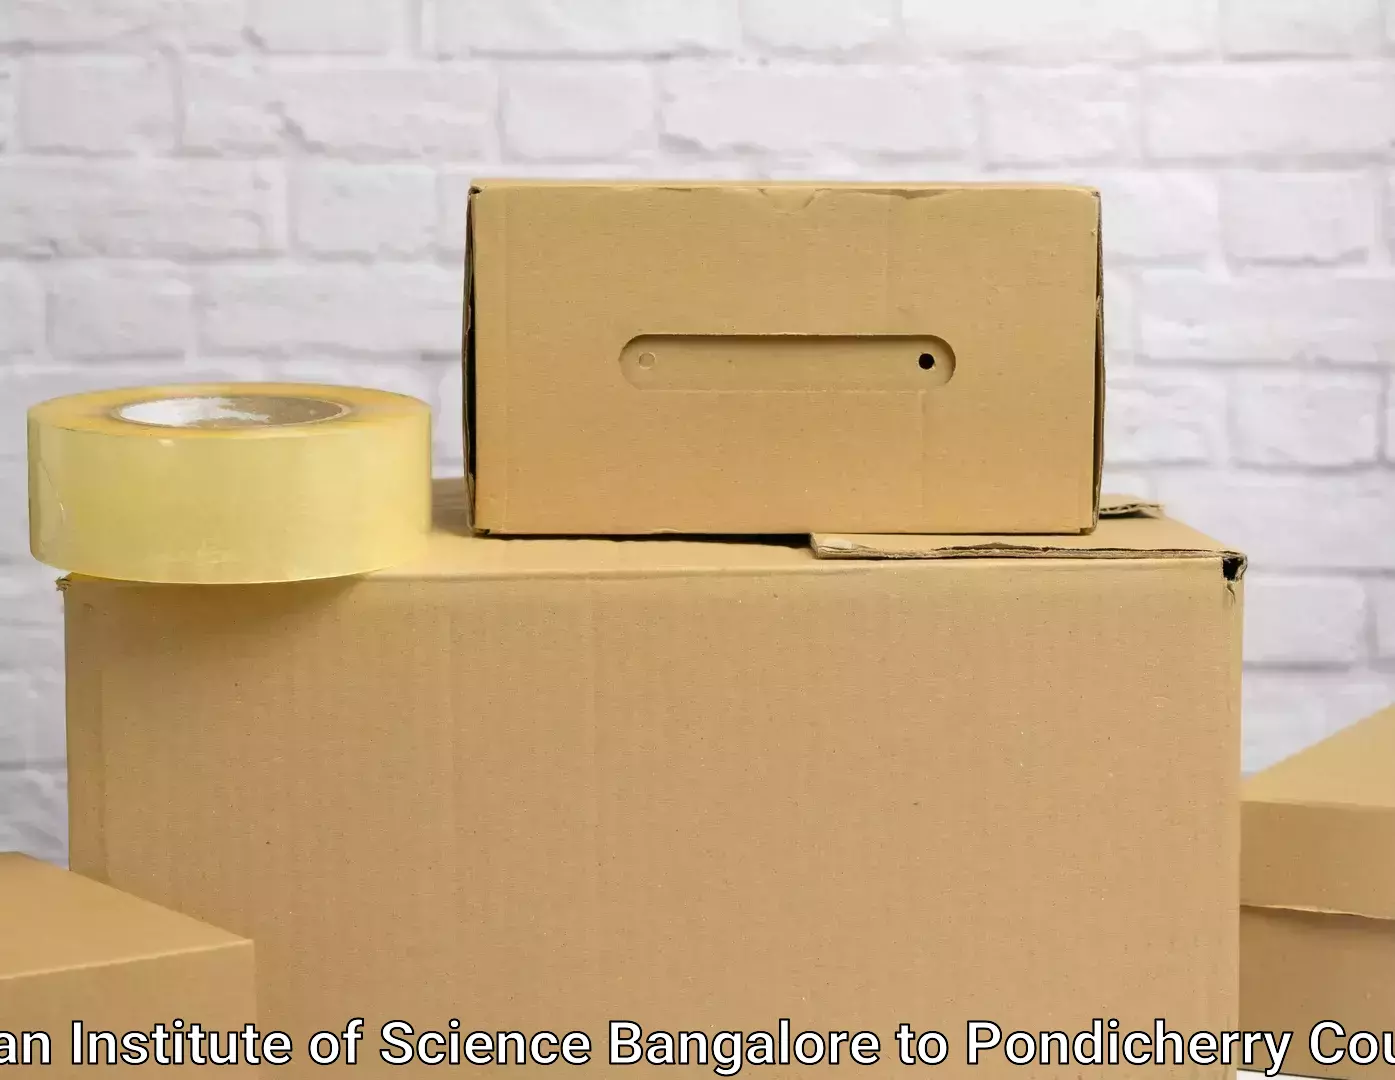 Nationwide furniture movers Indian Institute of Science Bangalore to Pondicherry